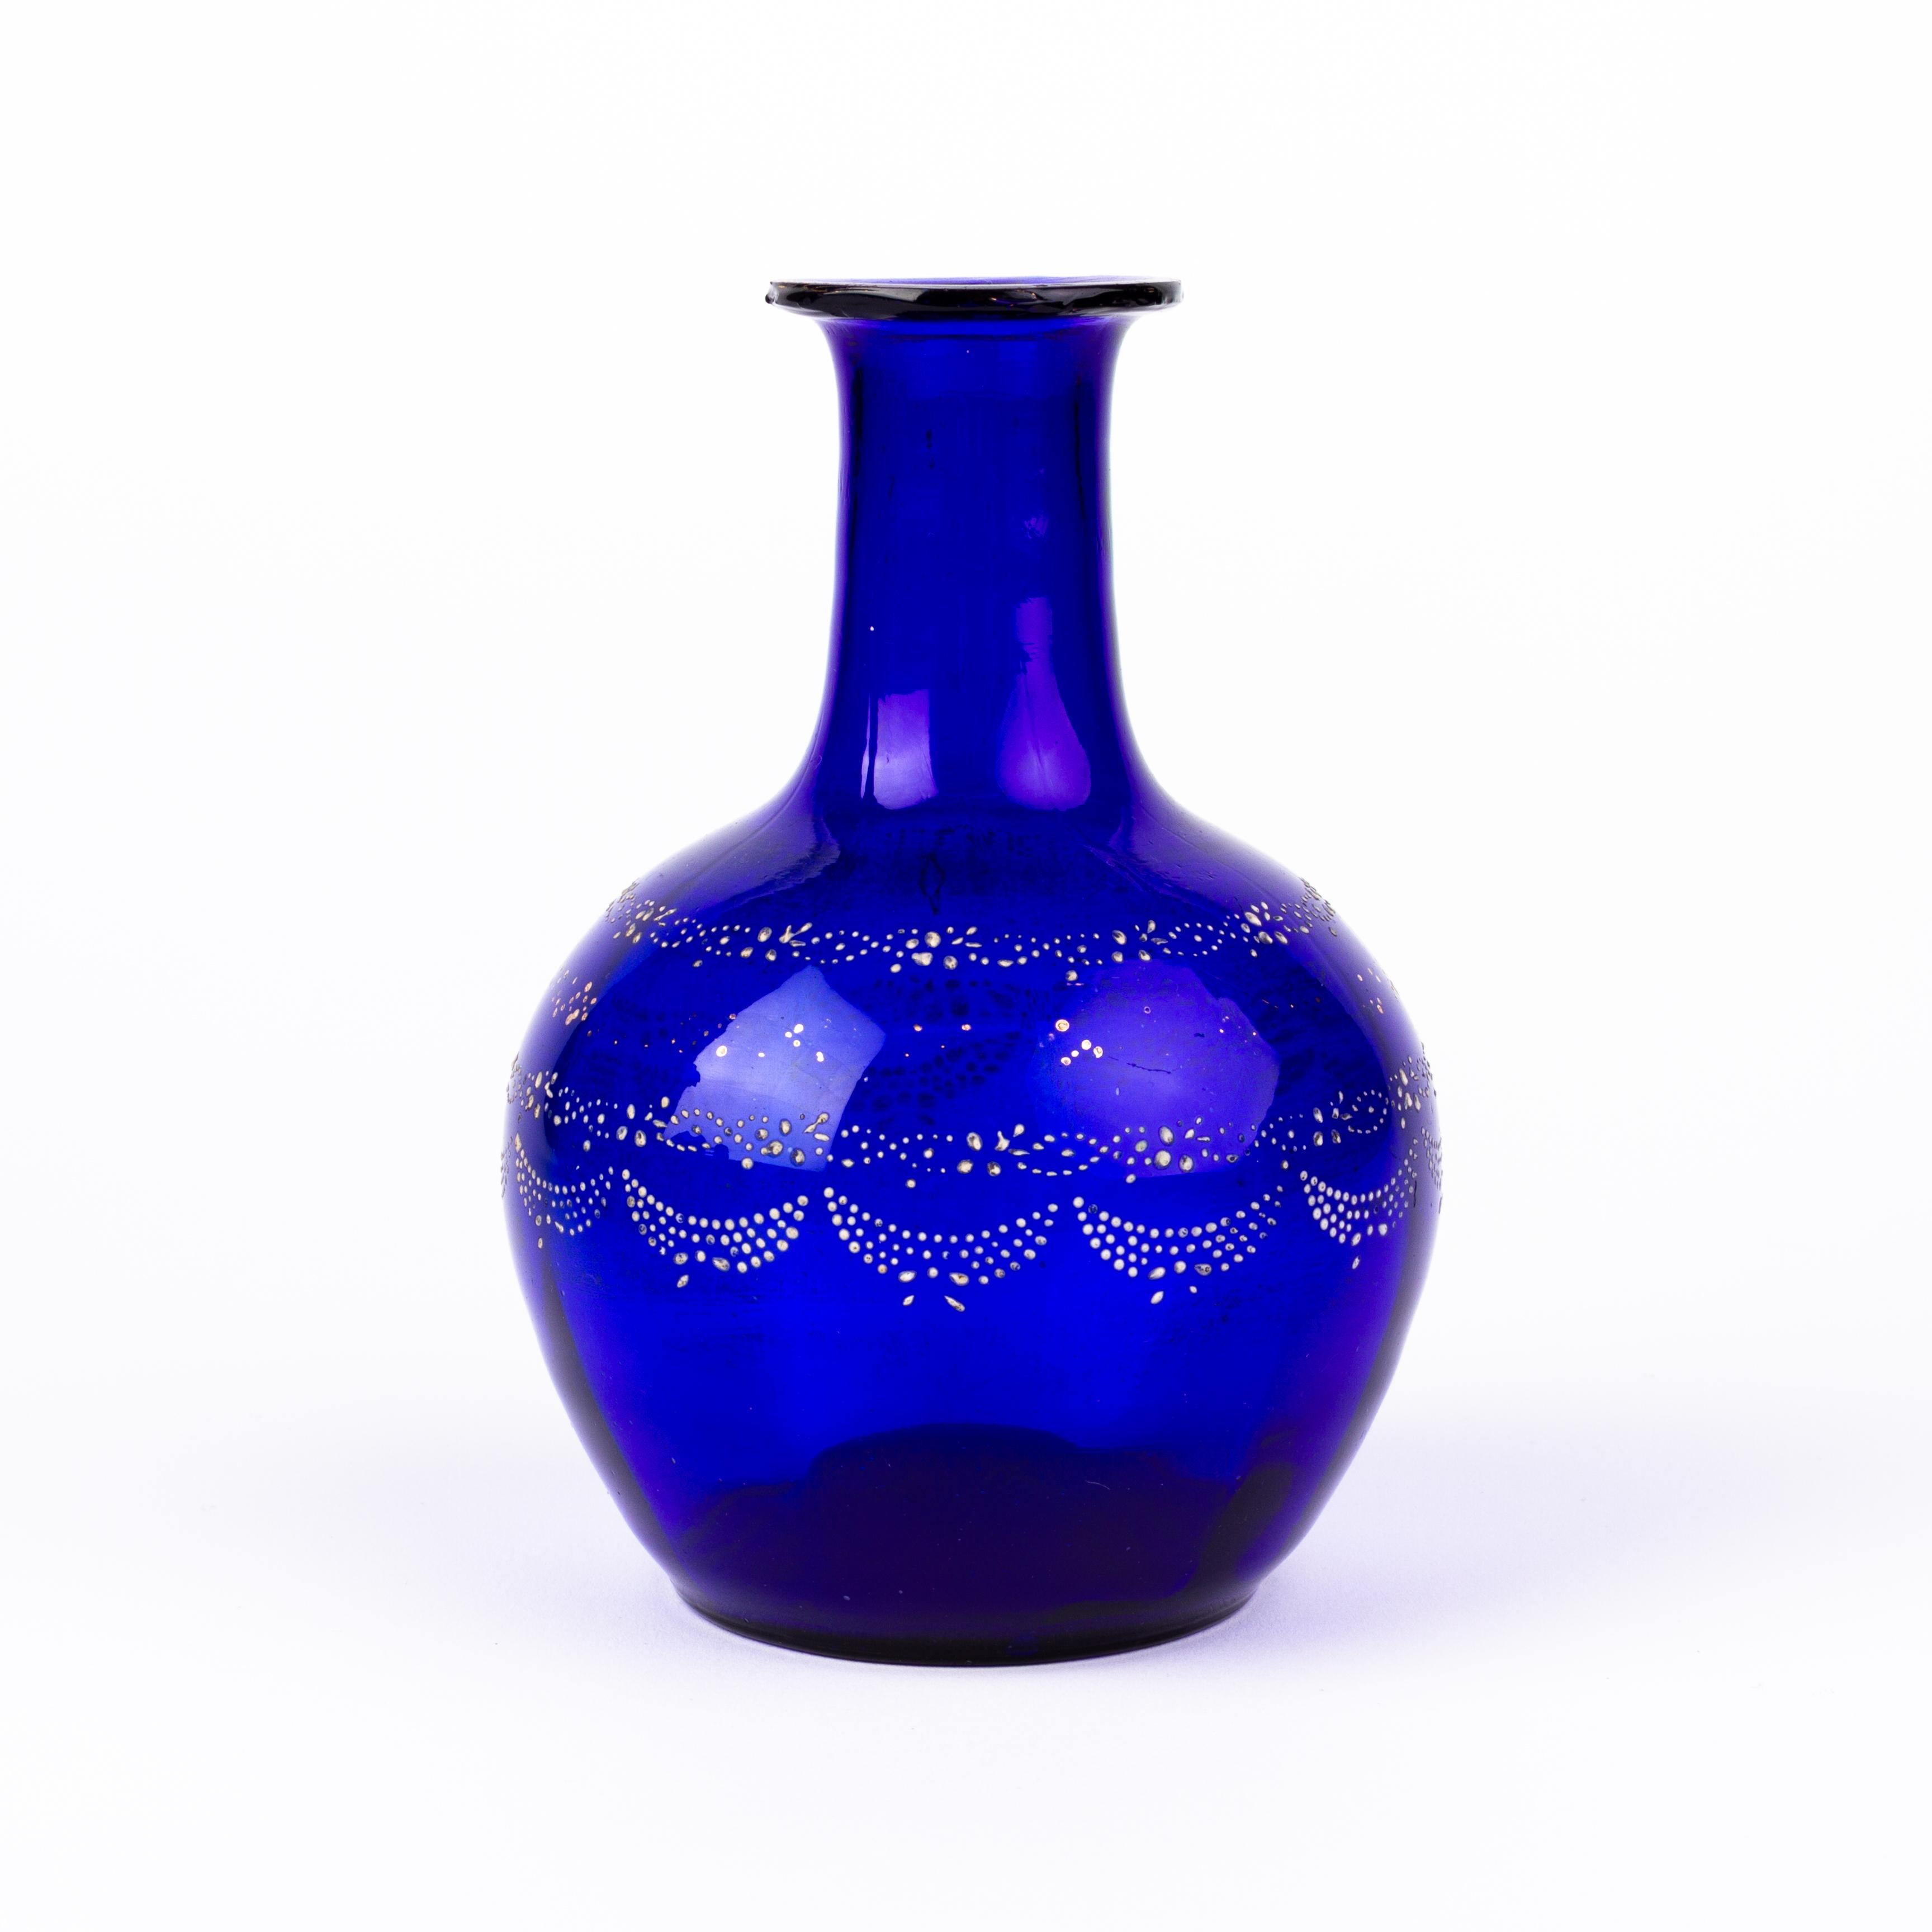 In good condition
From a private collection
Bristol Blue Enamel Painted Glass Bottle Vase